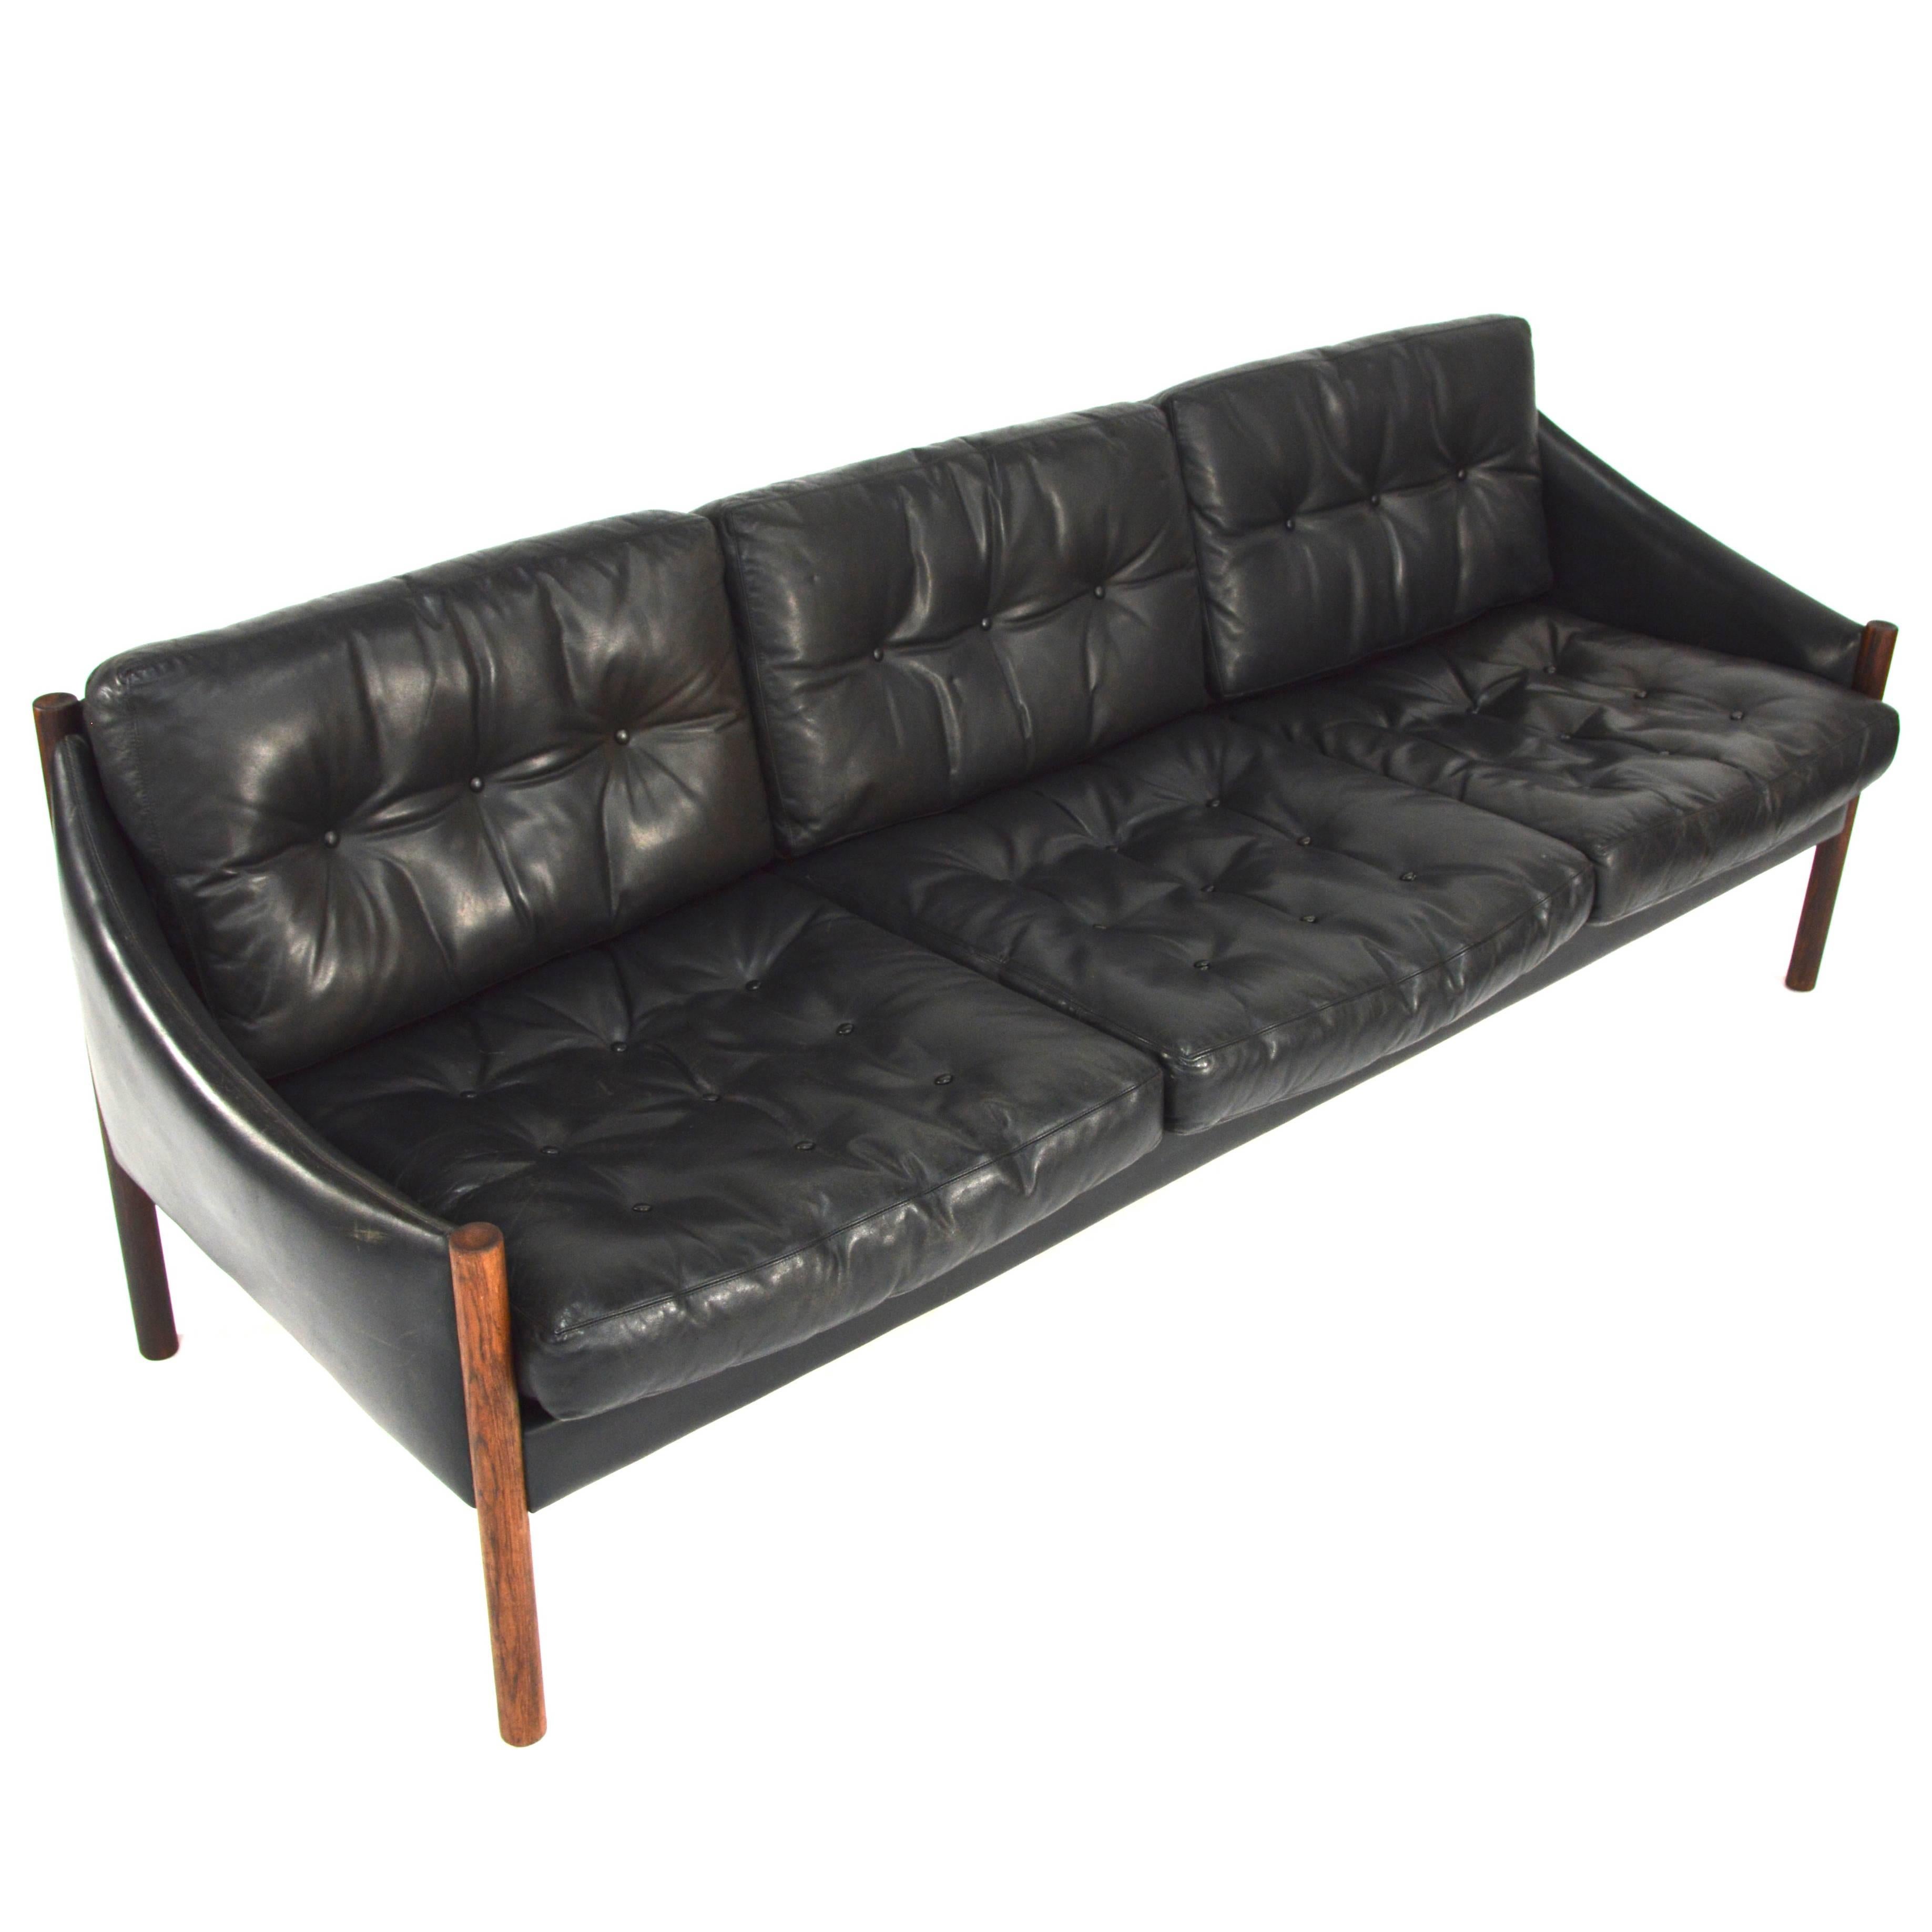 Arne Norell Attributed, Three-Seat Sofa in Black Leather and Rosewood, 1960s